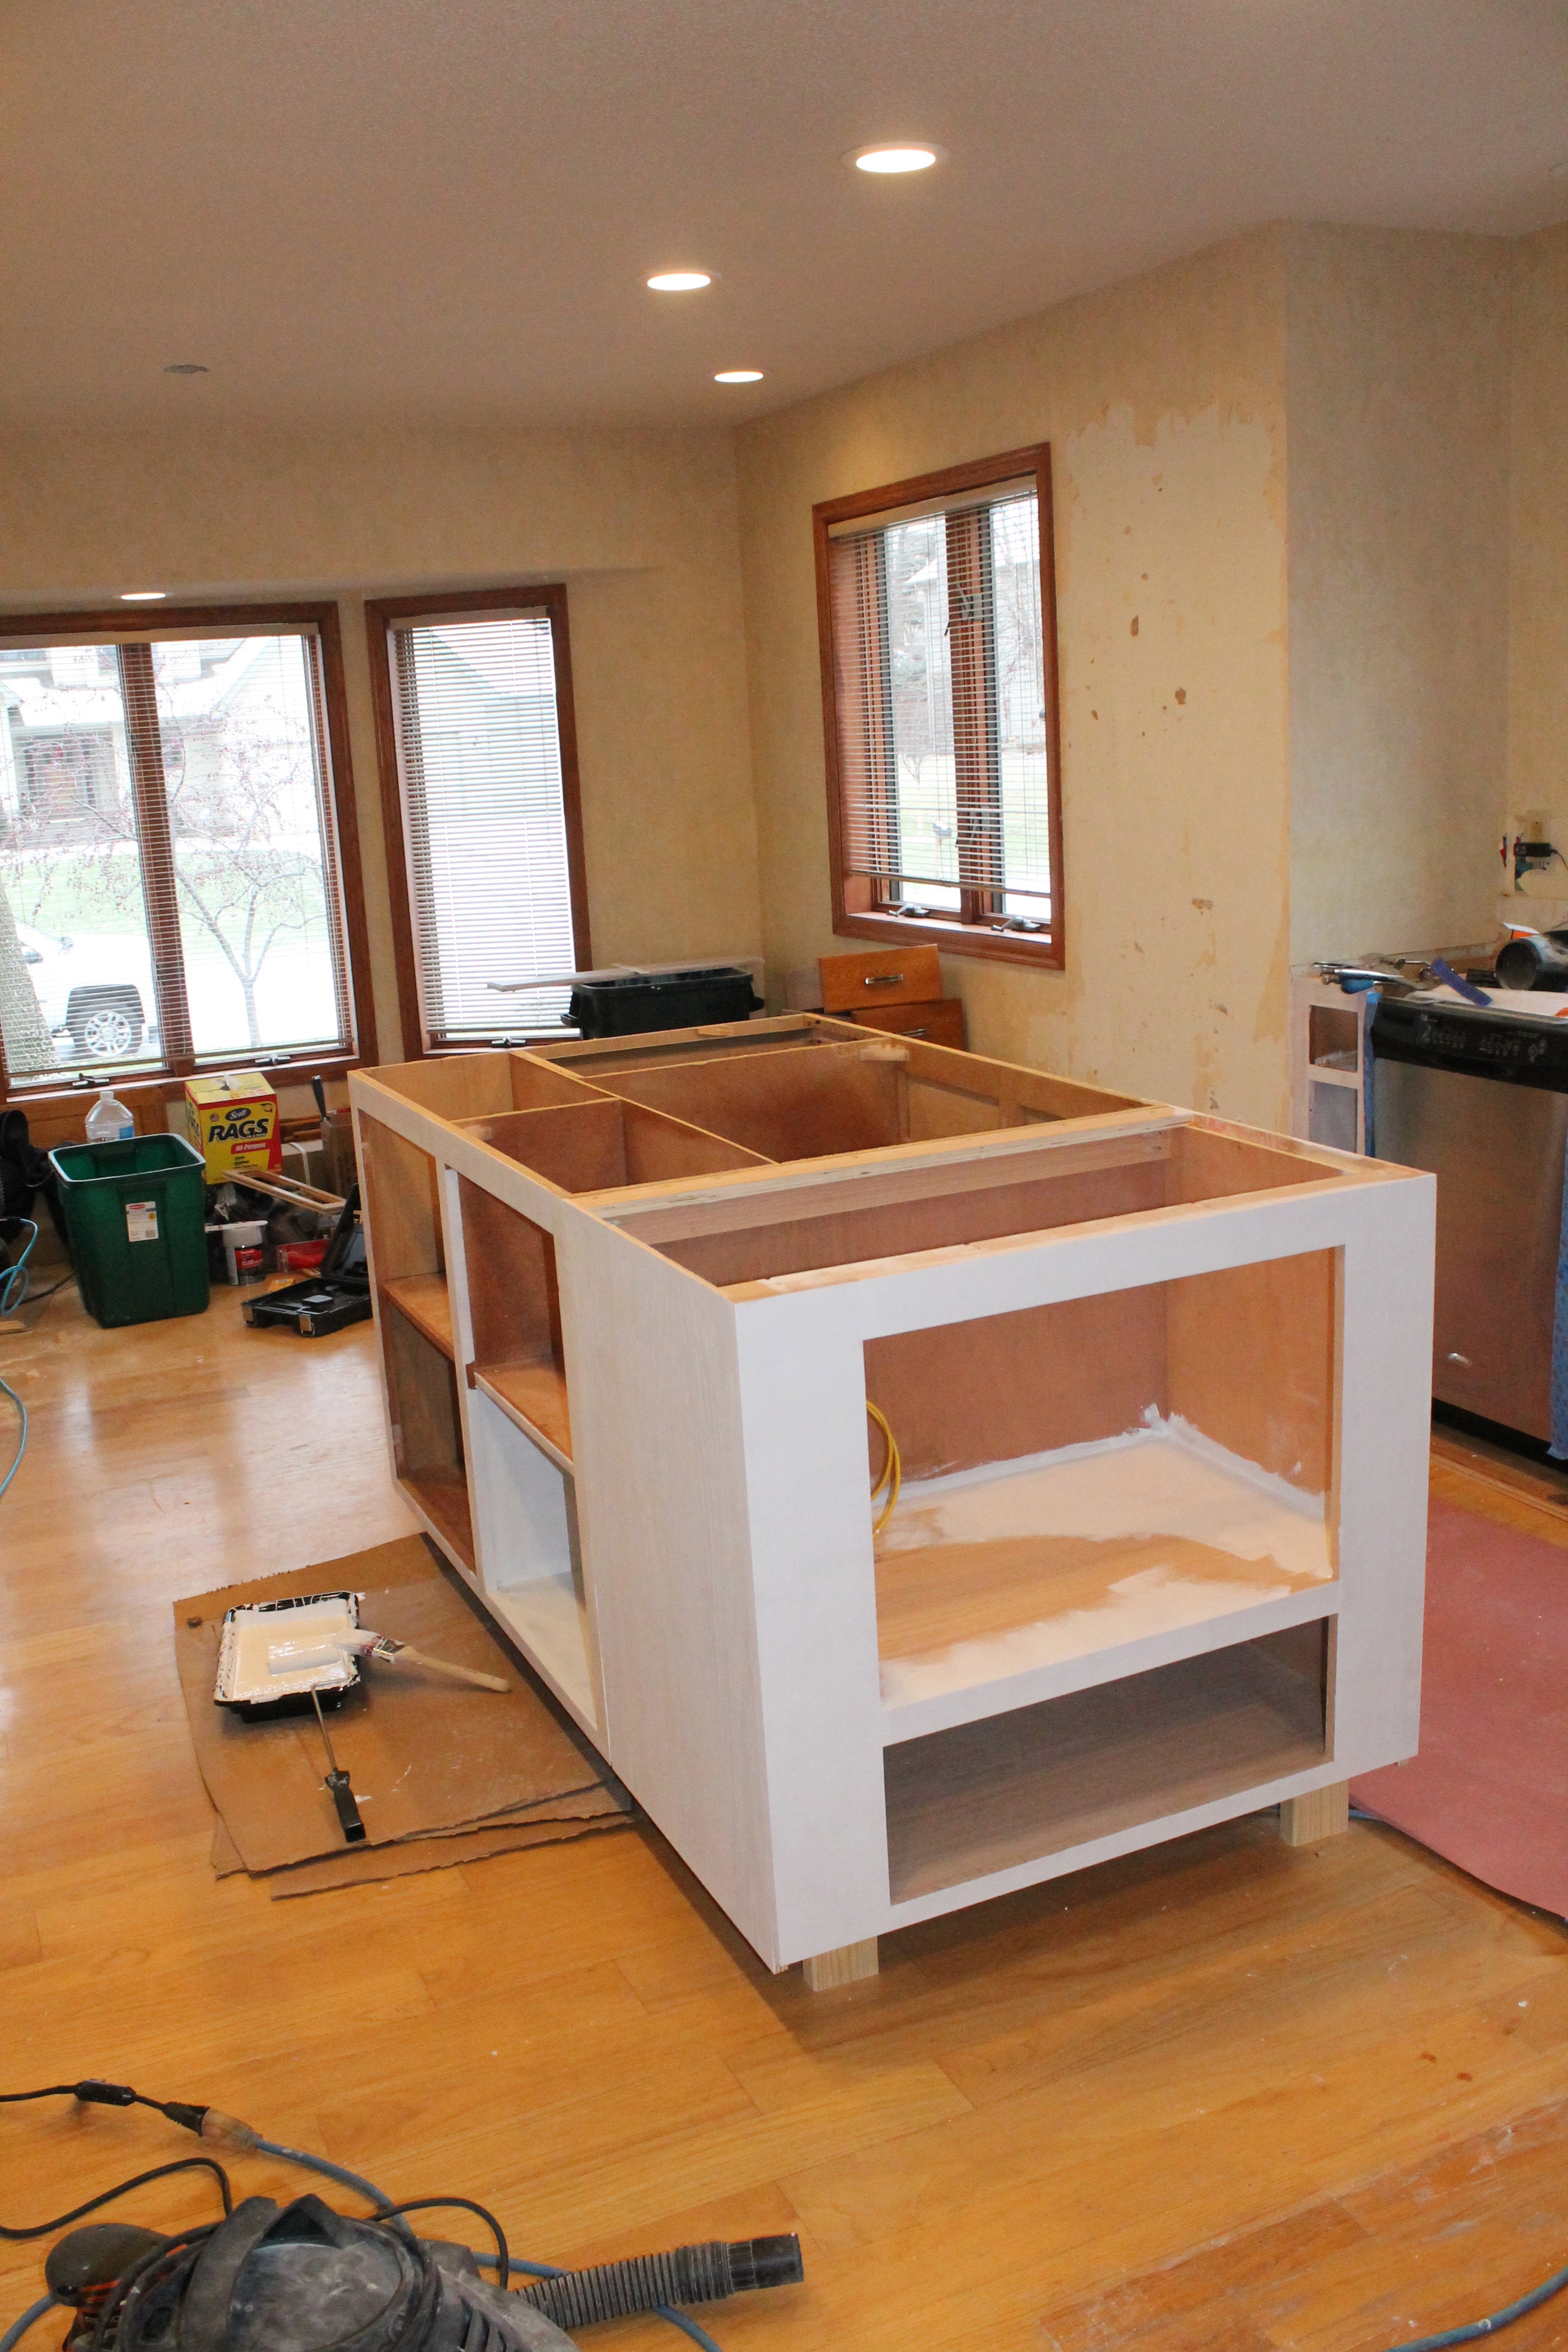 construction2style custom cabinetry, incorporating the old oak with the new custom pieces